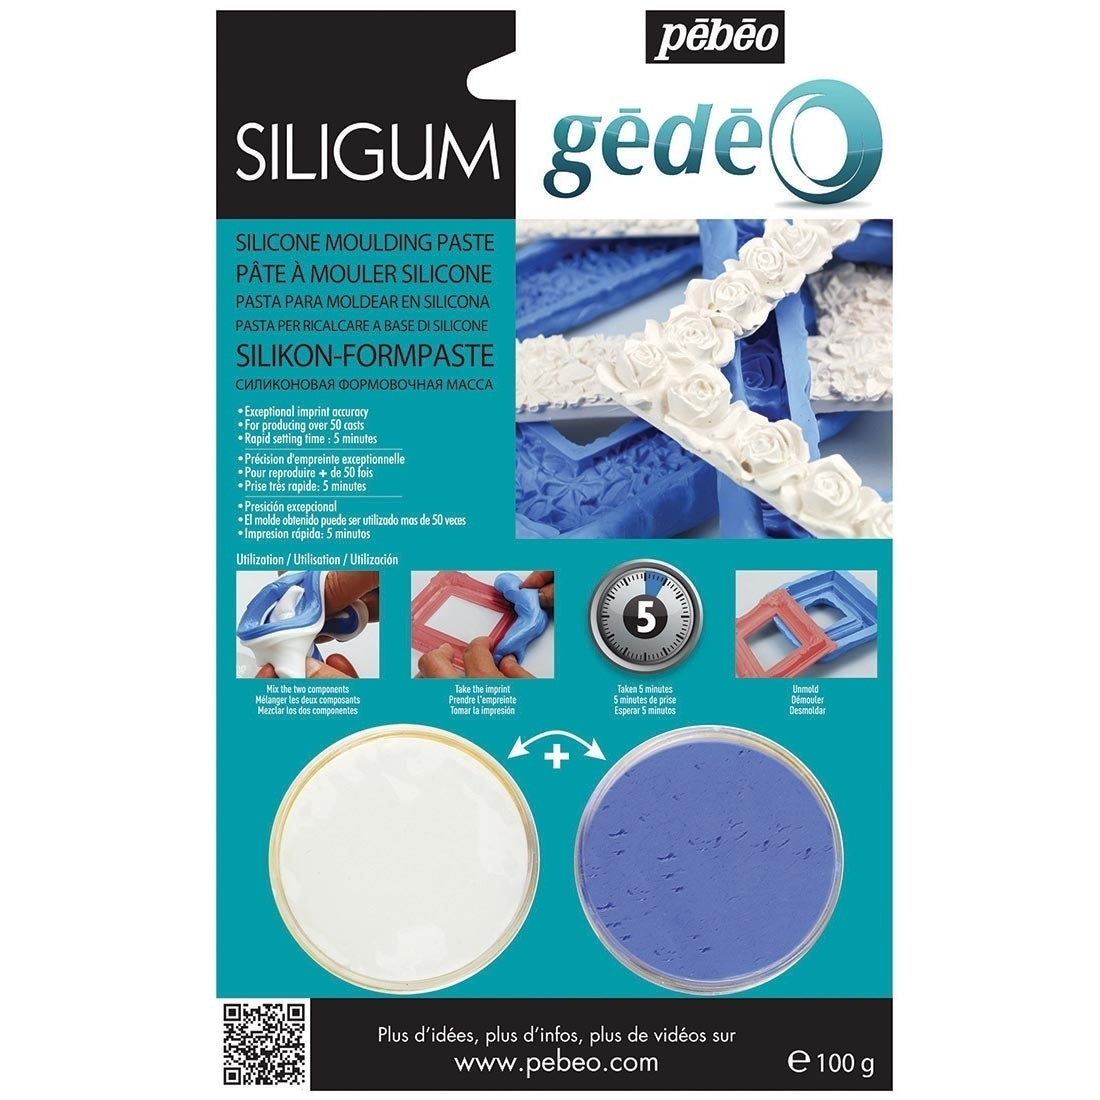 Pebeo - Gedeo - Moulding and Casting - Silicone Paste - Siligum - 100G